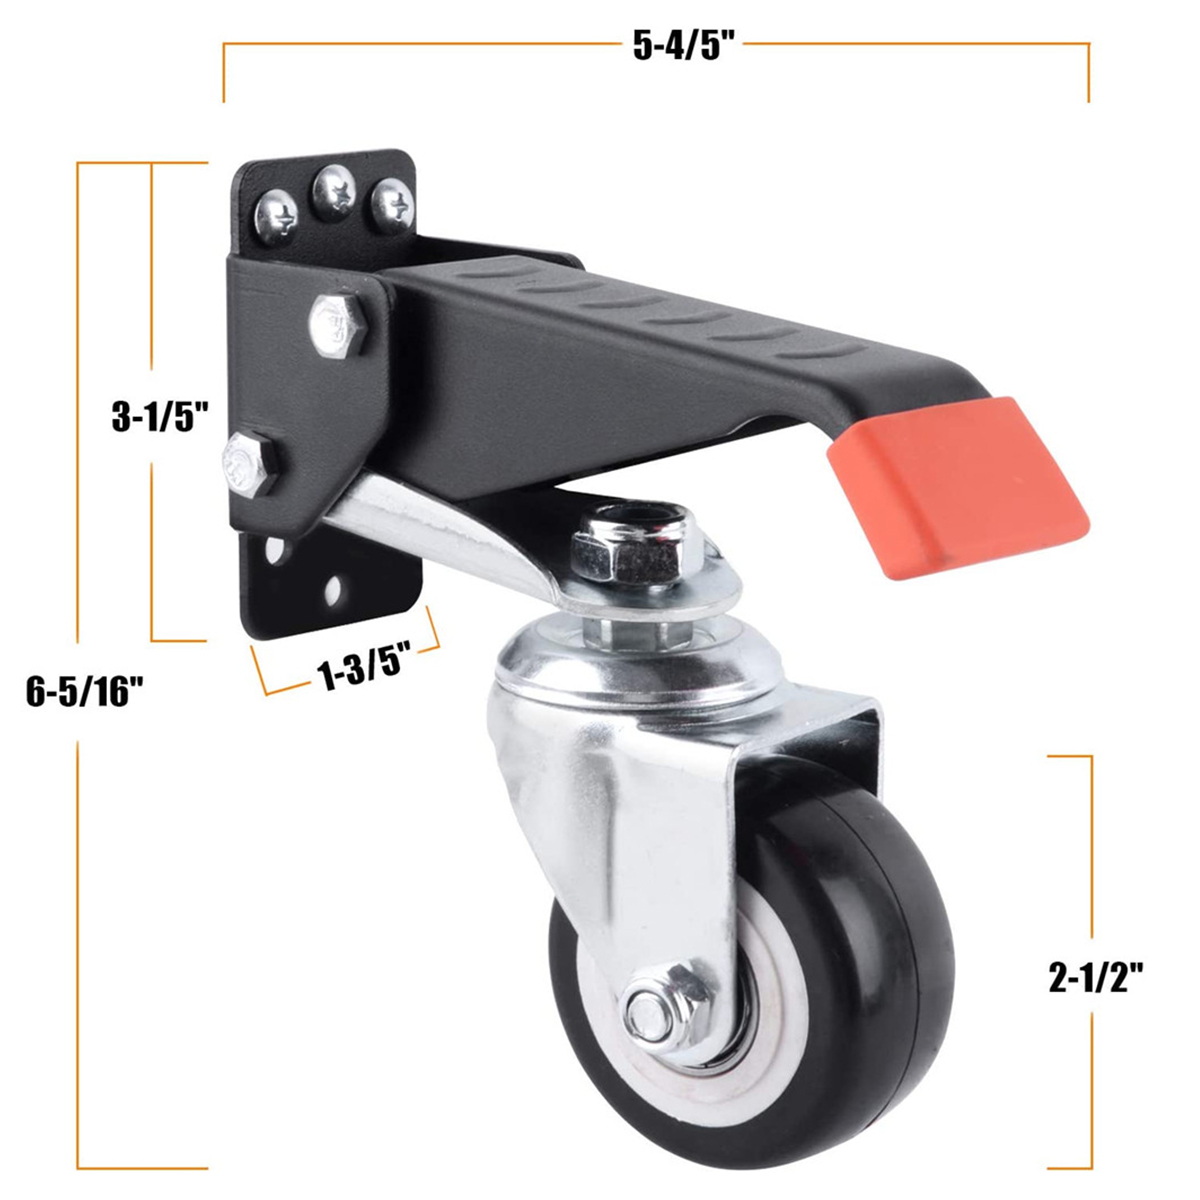 660-LBS-Heavy-Duty-Workbench-Casters-Kit-Retractable-Caster-Wheels-for-Workbenches-Machinery-and-Tab-1808770-7